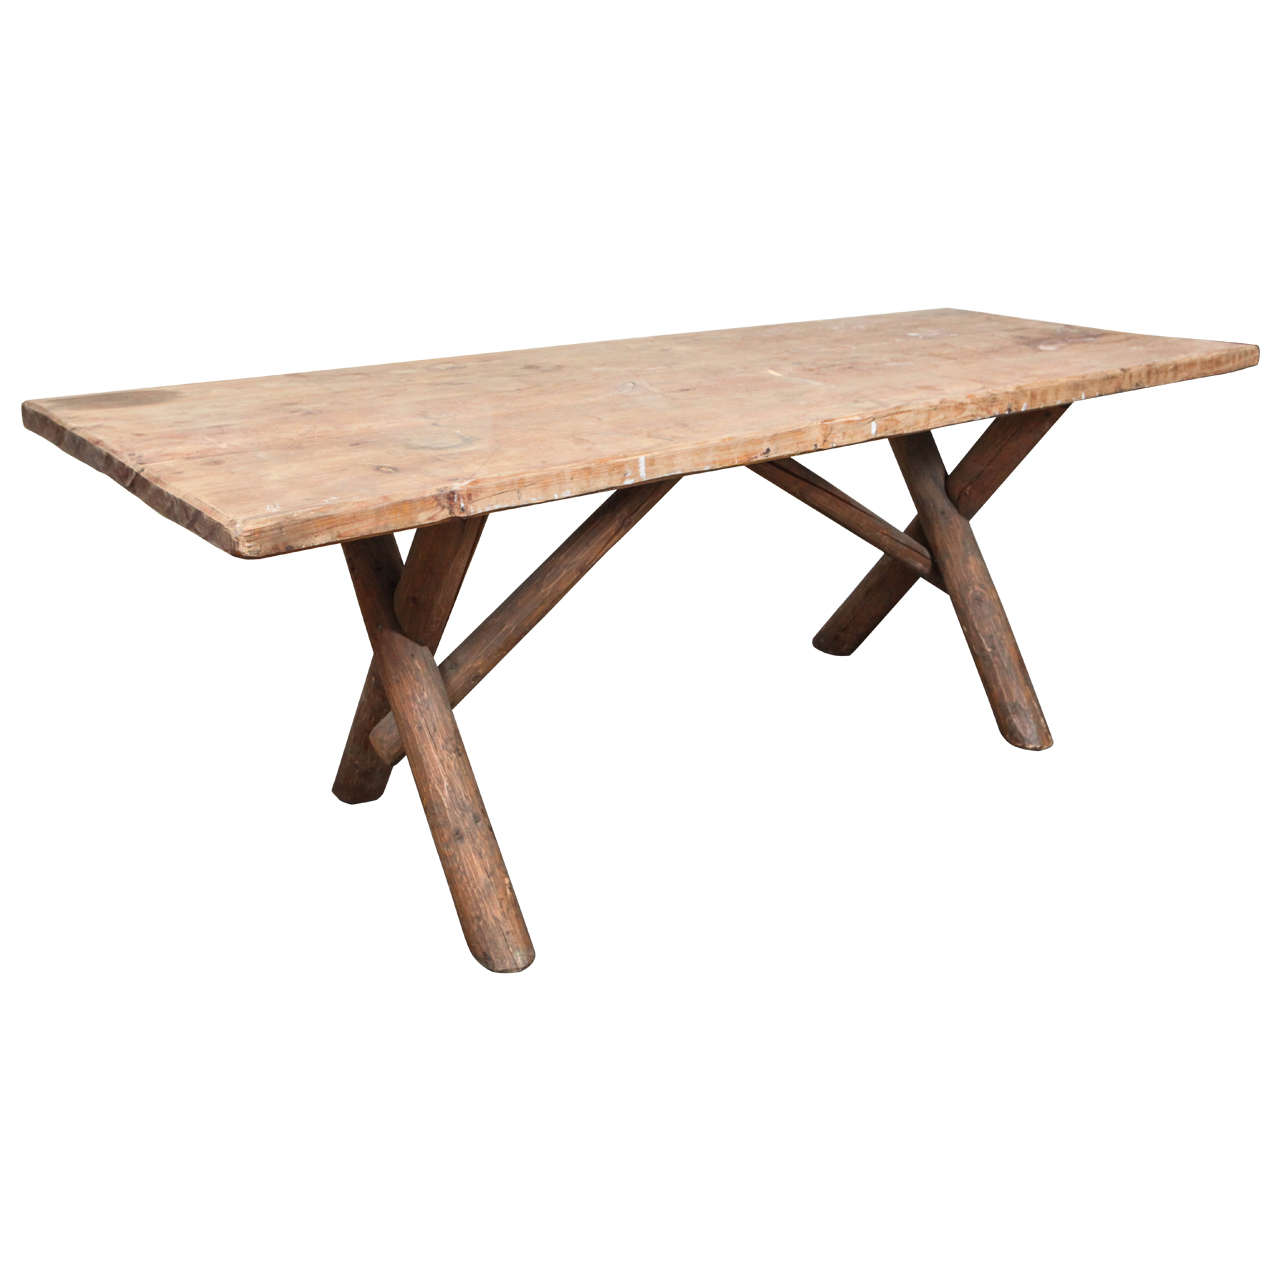 Rustic American Dining Farm Table with X Base